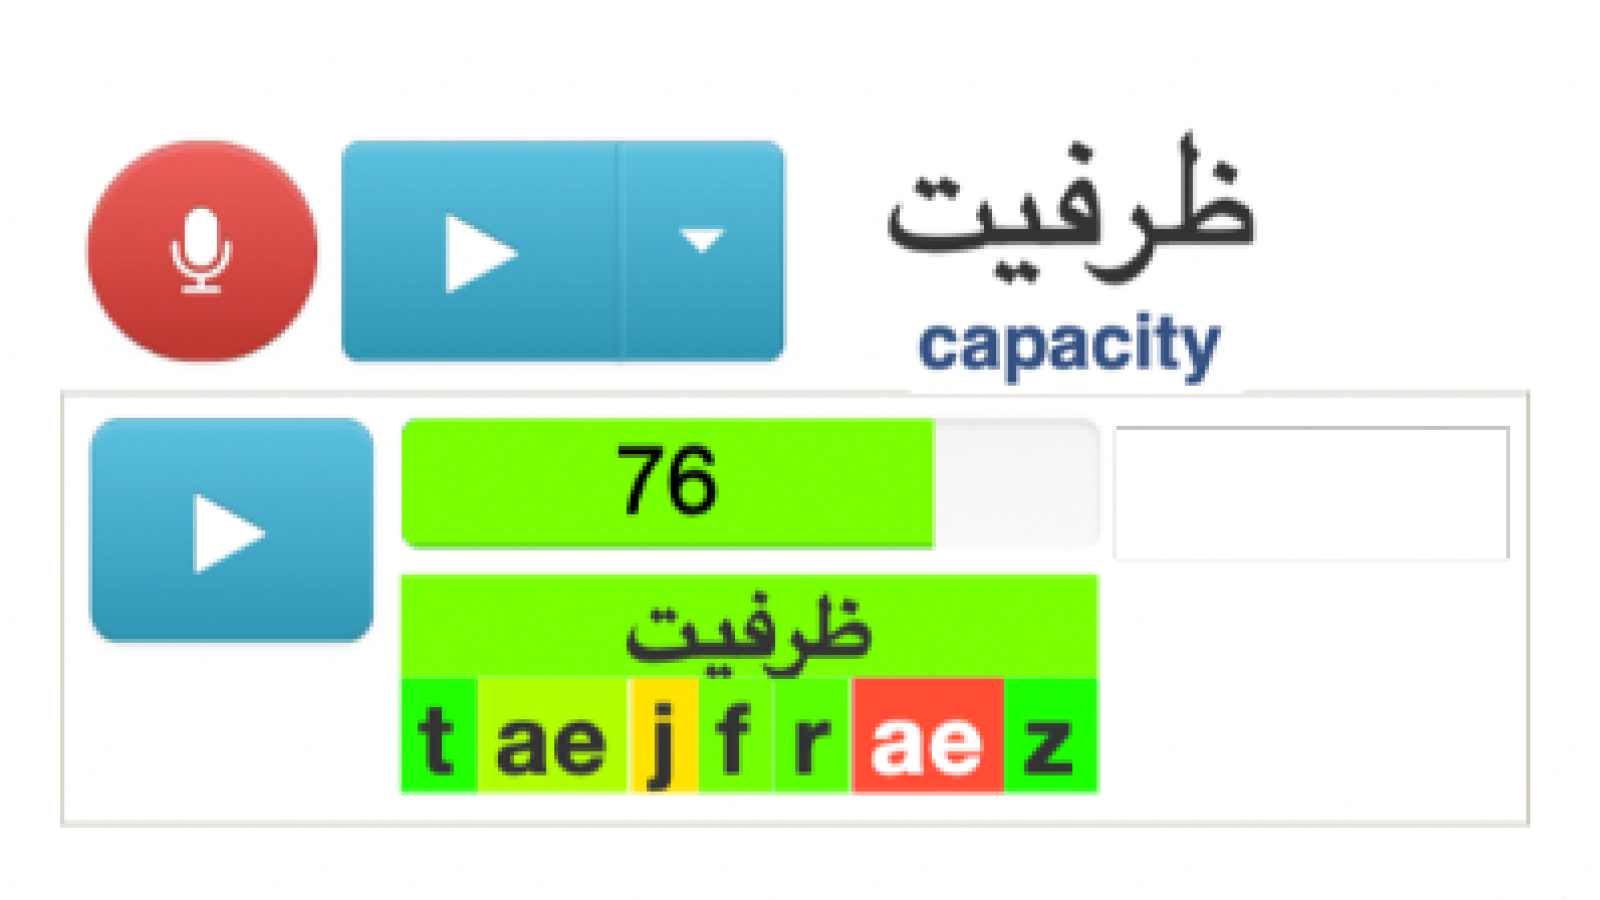 A screenshot of the NetProf mobile interface shows two words (the Farsi word for capacity, and the Ukranian word for self-defense), with each word broken down by phoneme. 